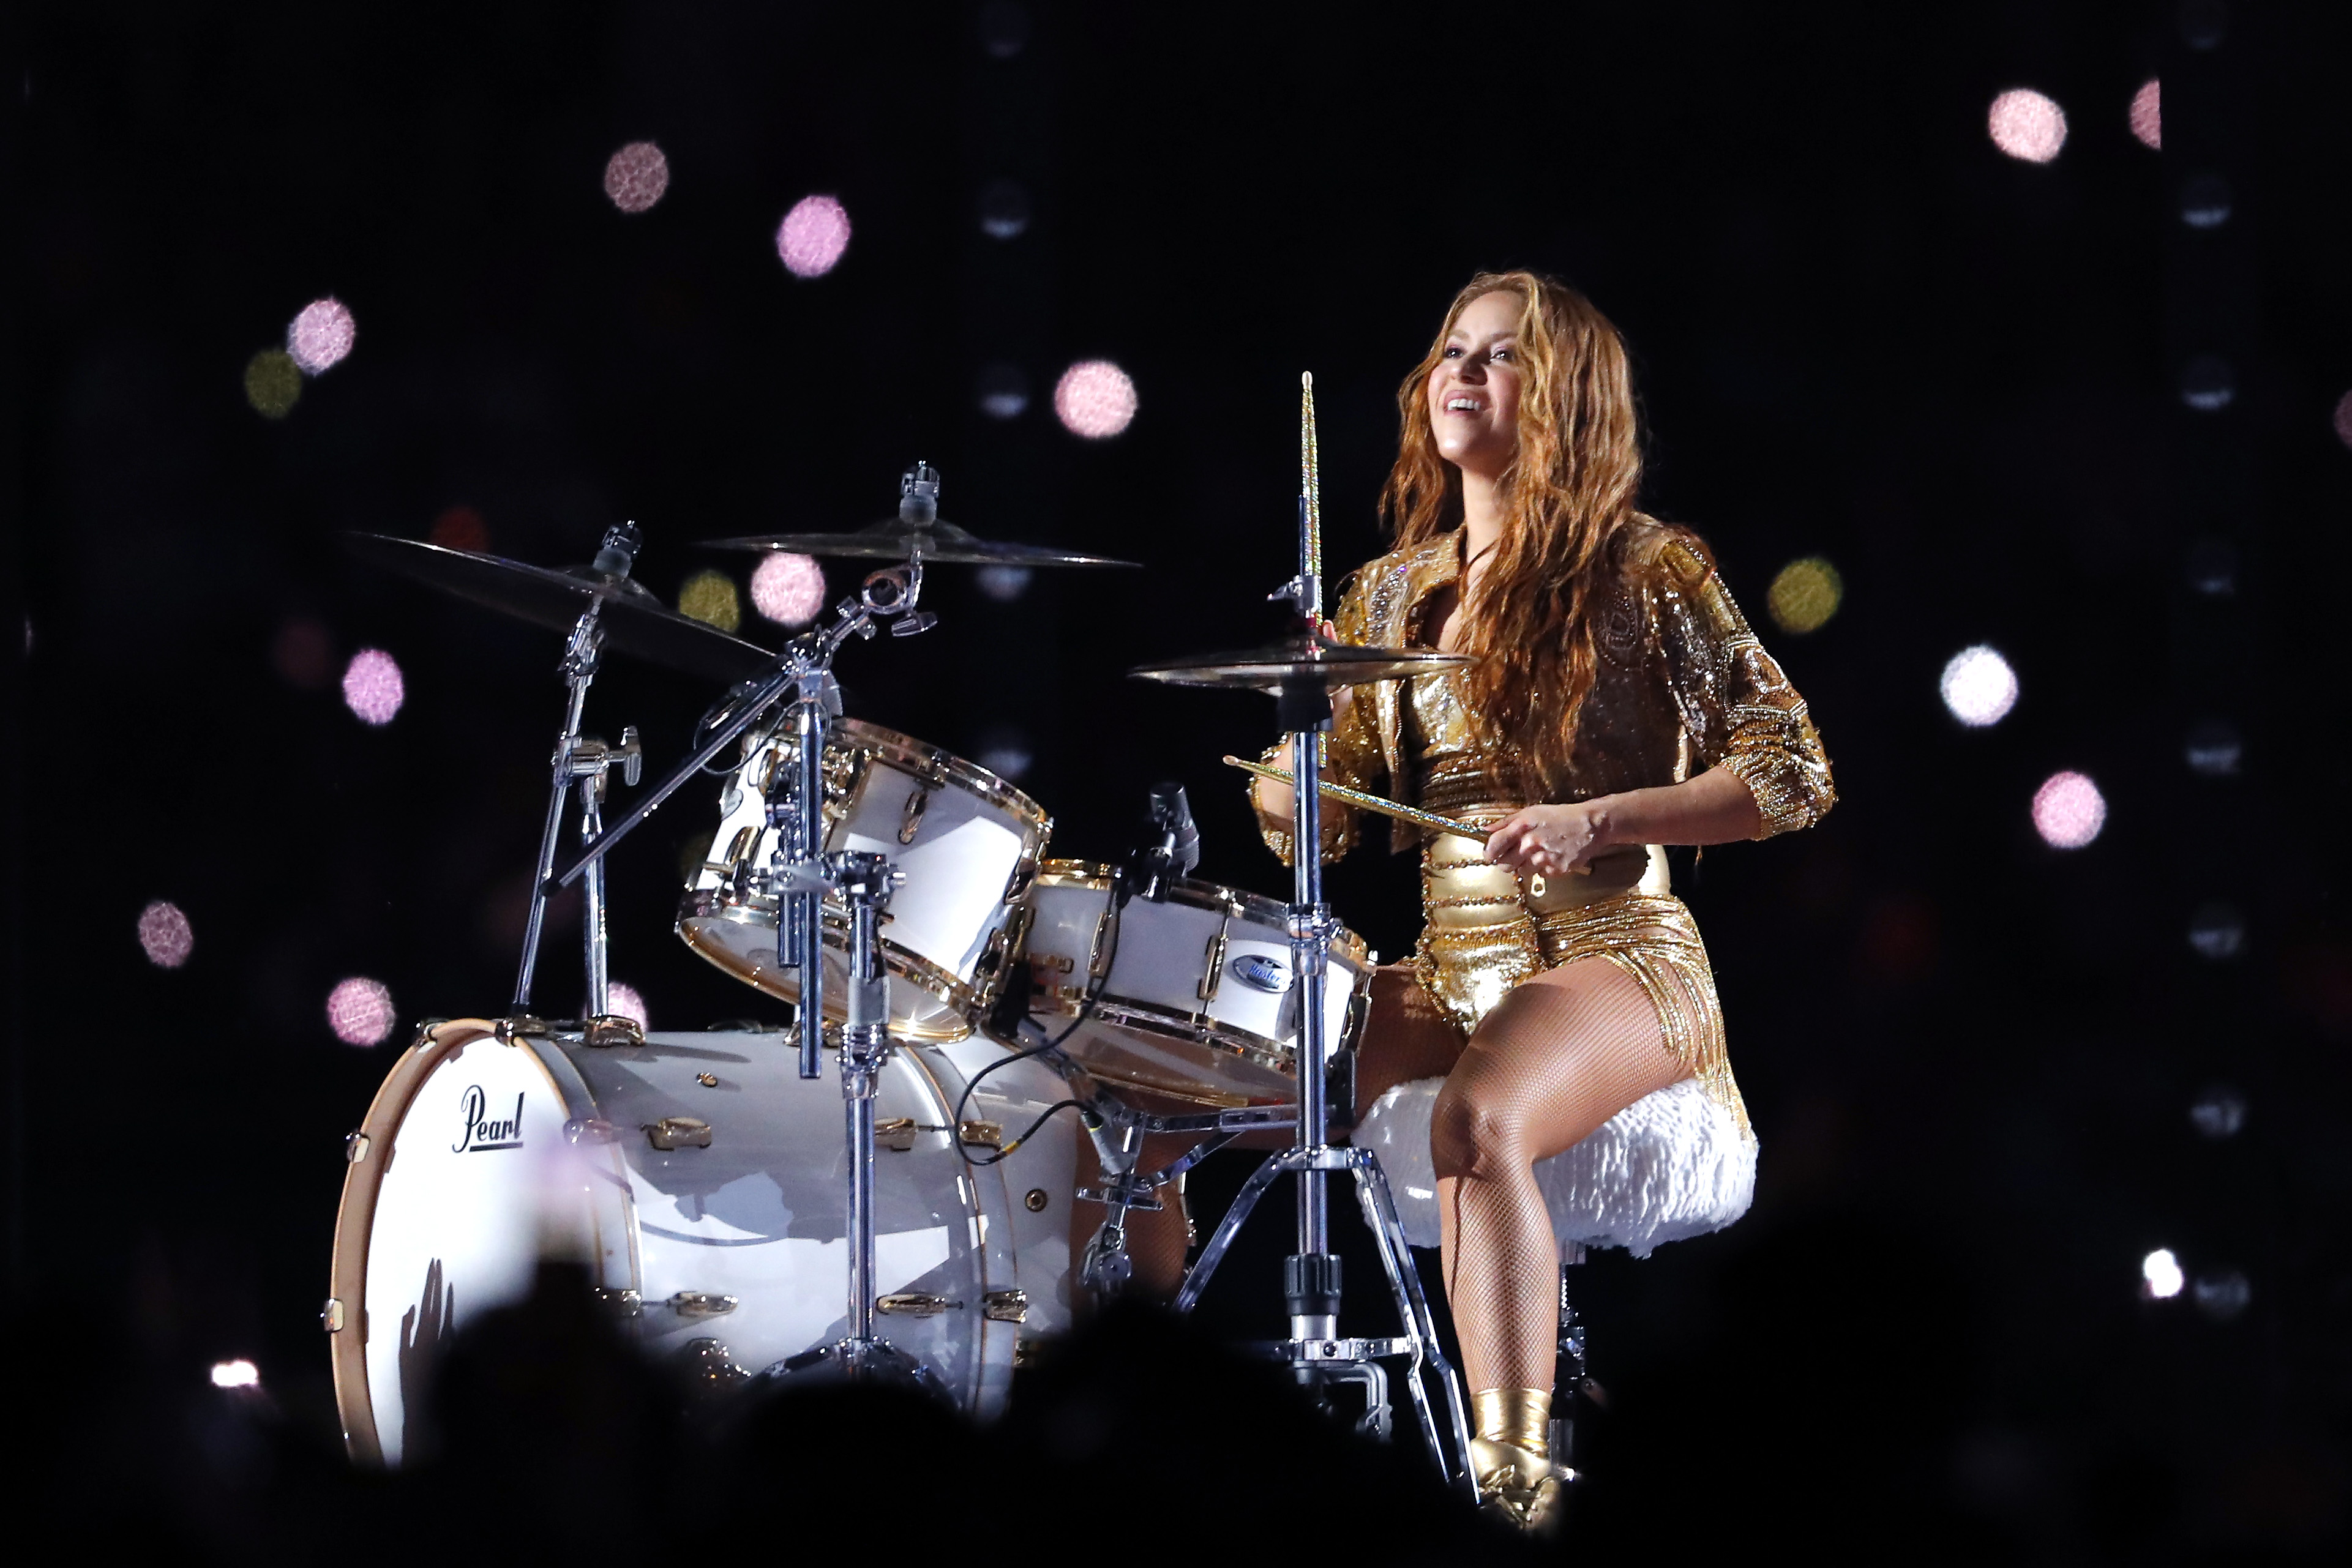 MIAMI, FLORIDA - FEBRUARY 02: Colombian singer Shakira plays the drums during the Pepsi Super Bowl LIV Halftime Show at Hard Rock Stadium on February 02, 2020 in Miami, Florida. (Photo by Kevin C. Cox/Getty Images)